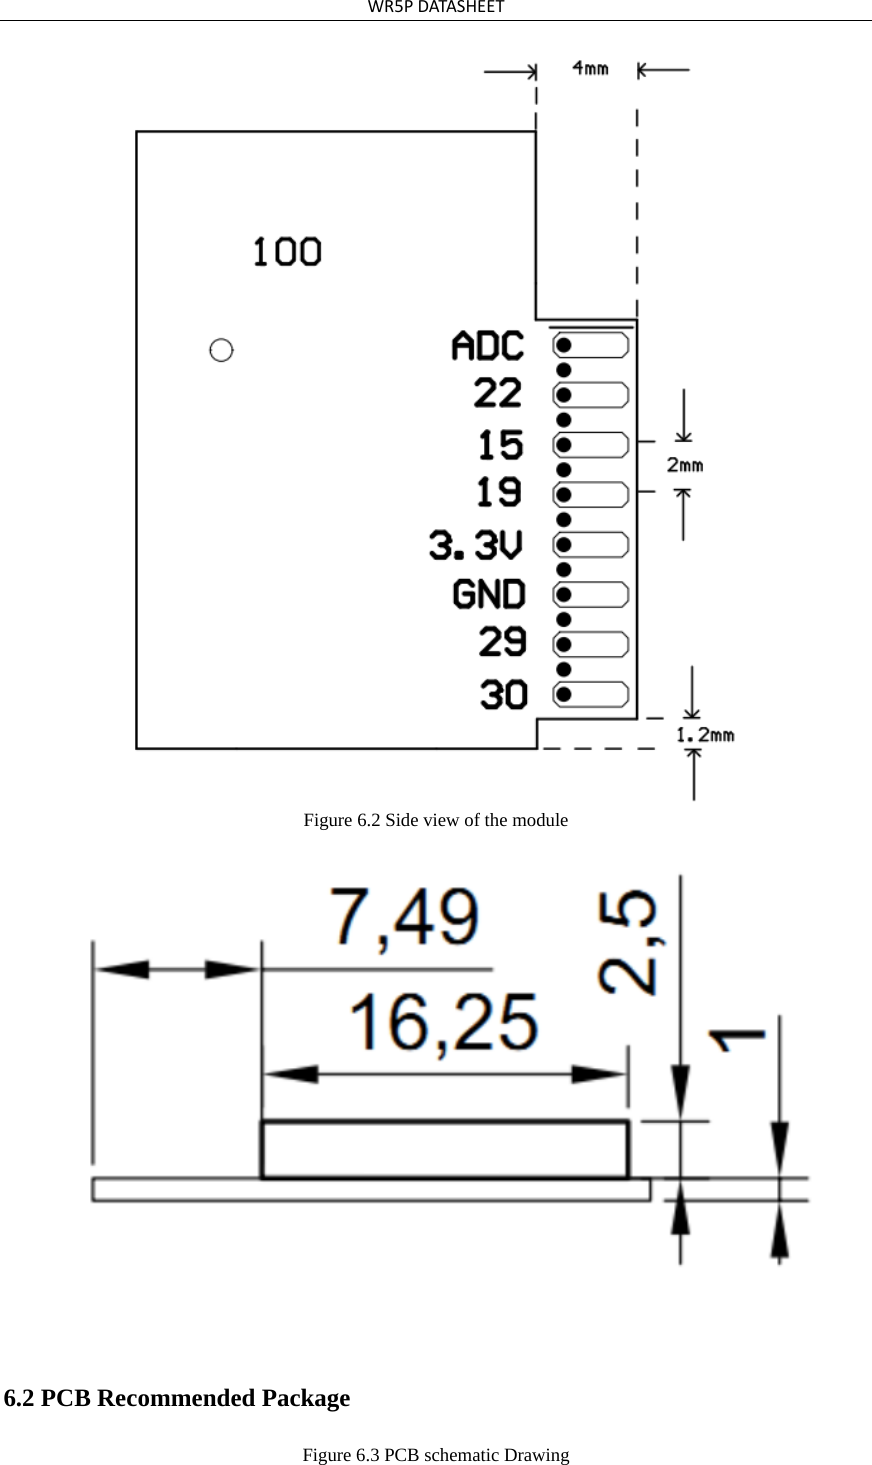 WR5PDATASHEETFigure 6.2 Side view of the module 6.2 PCB Recommended Package Figure 6.3 PCB schematic Drawing 